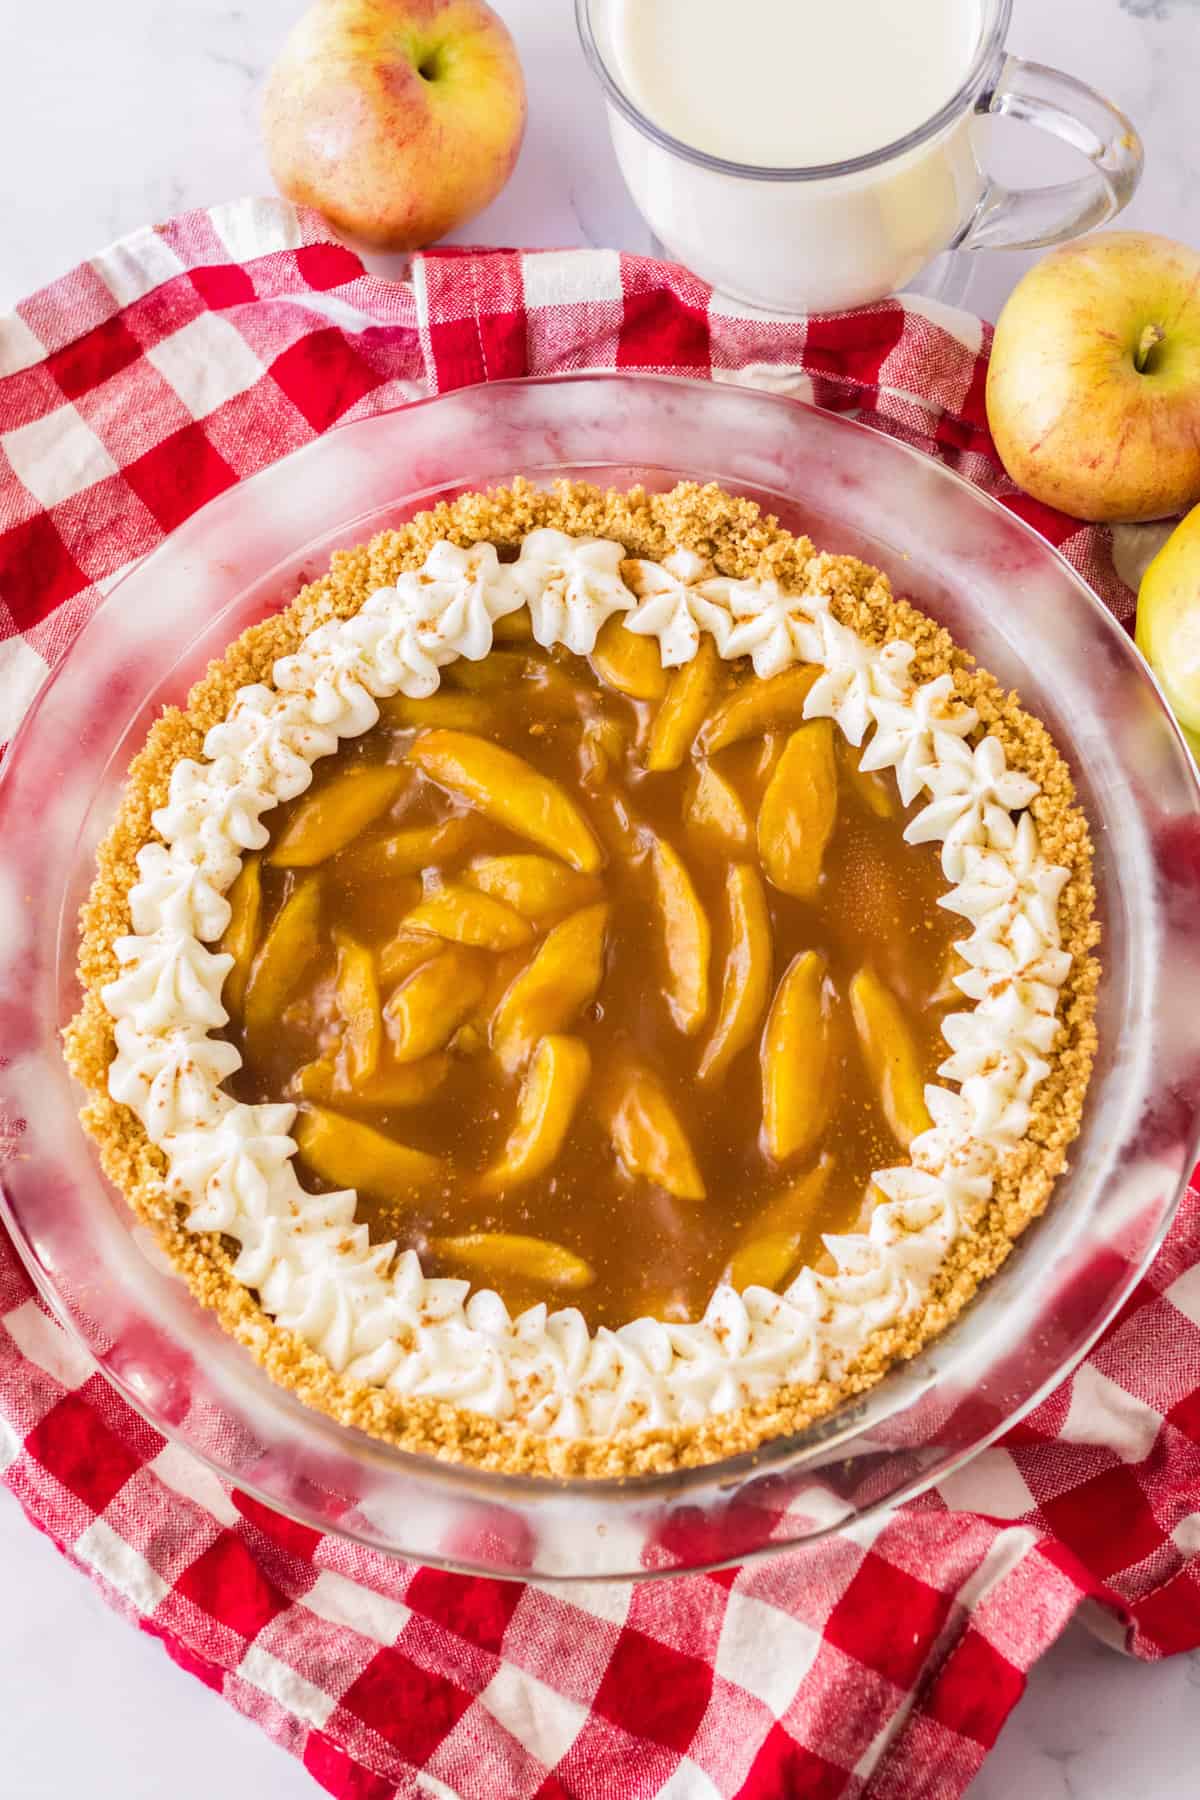 No bake apple pie with whipped cream piped around the perimeter.